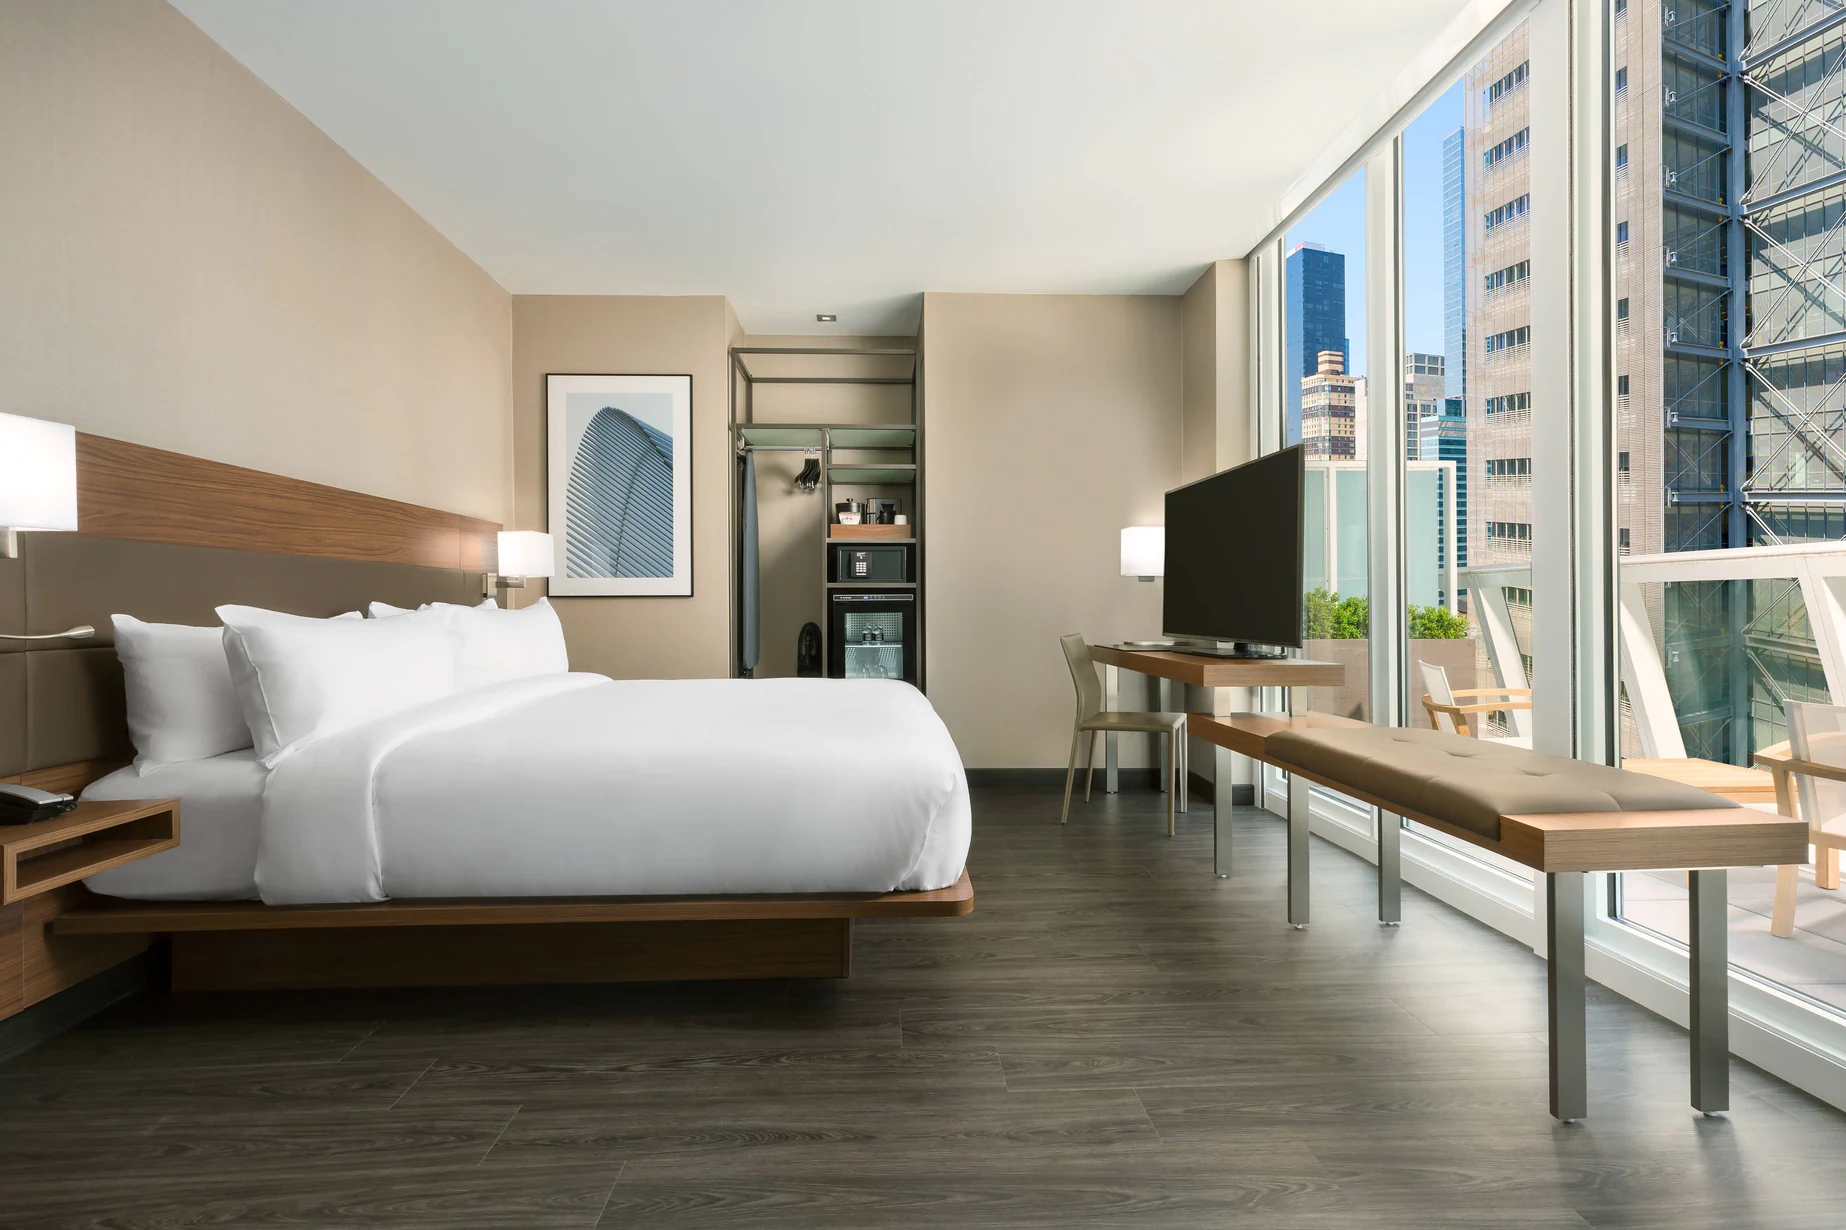 Marriott International and HMI Hotel Group Announces a Multi-Property Conversion Deal in Japan